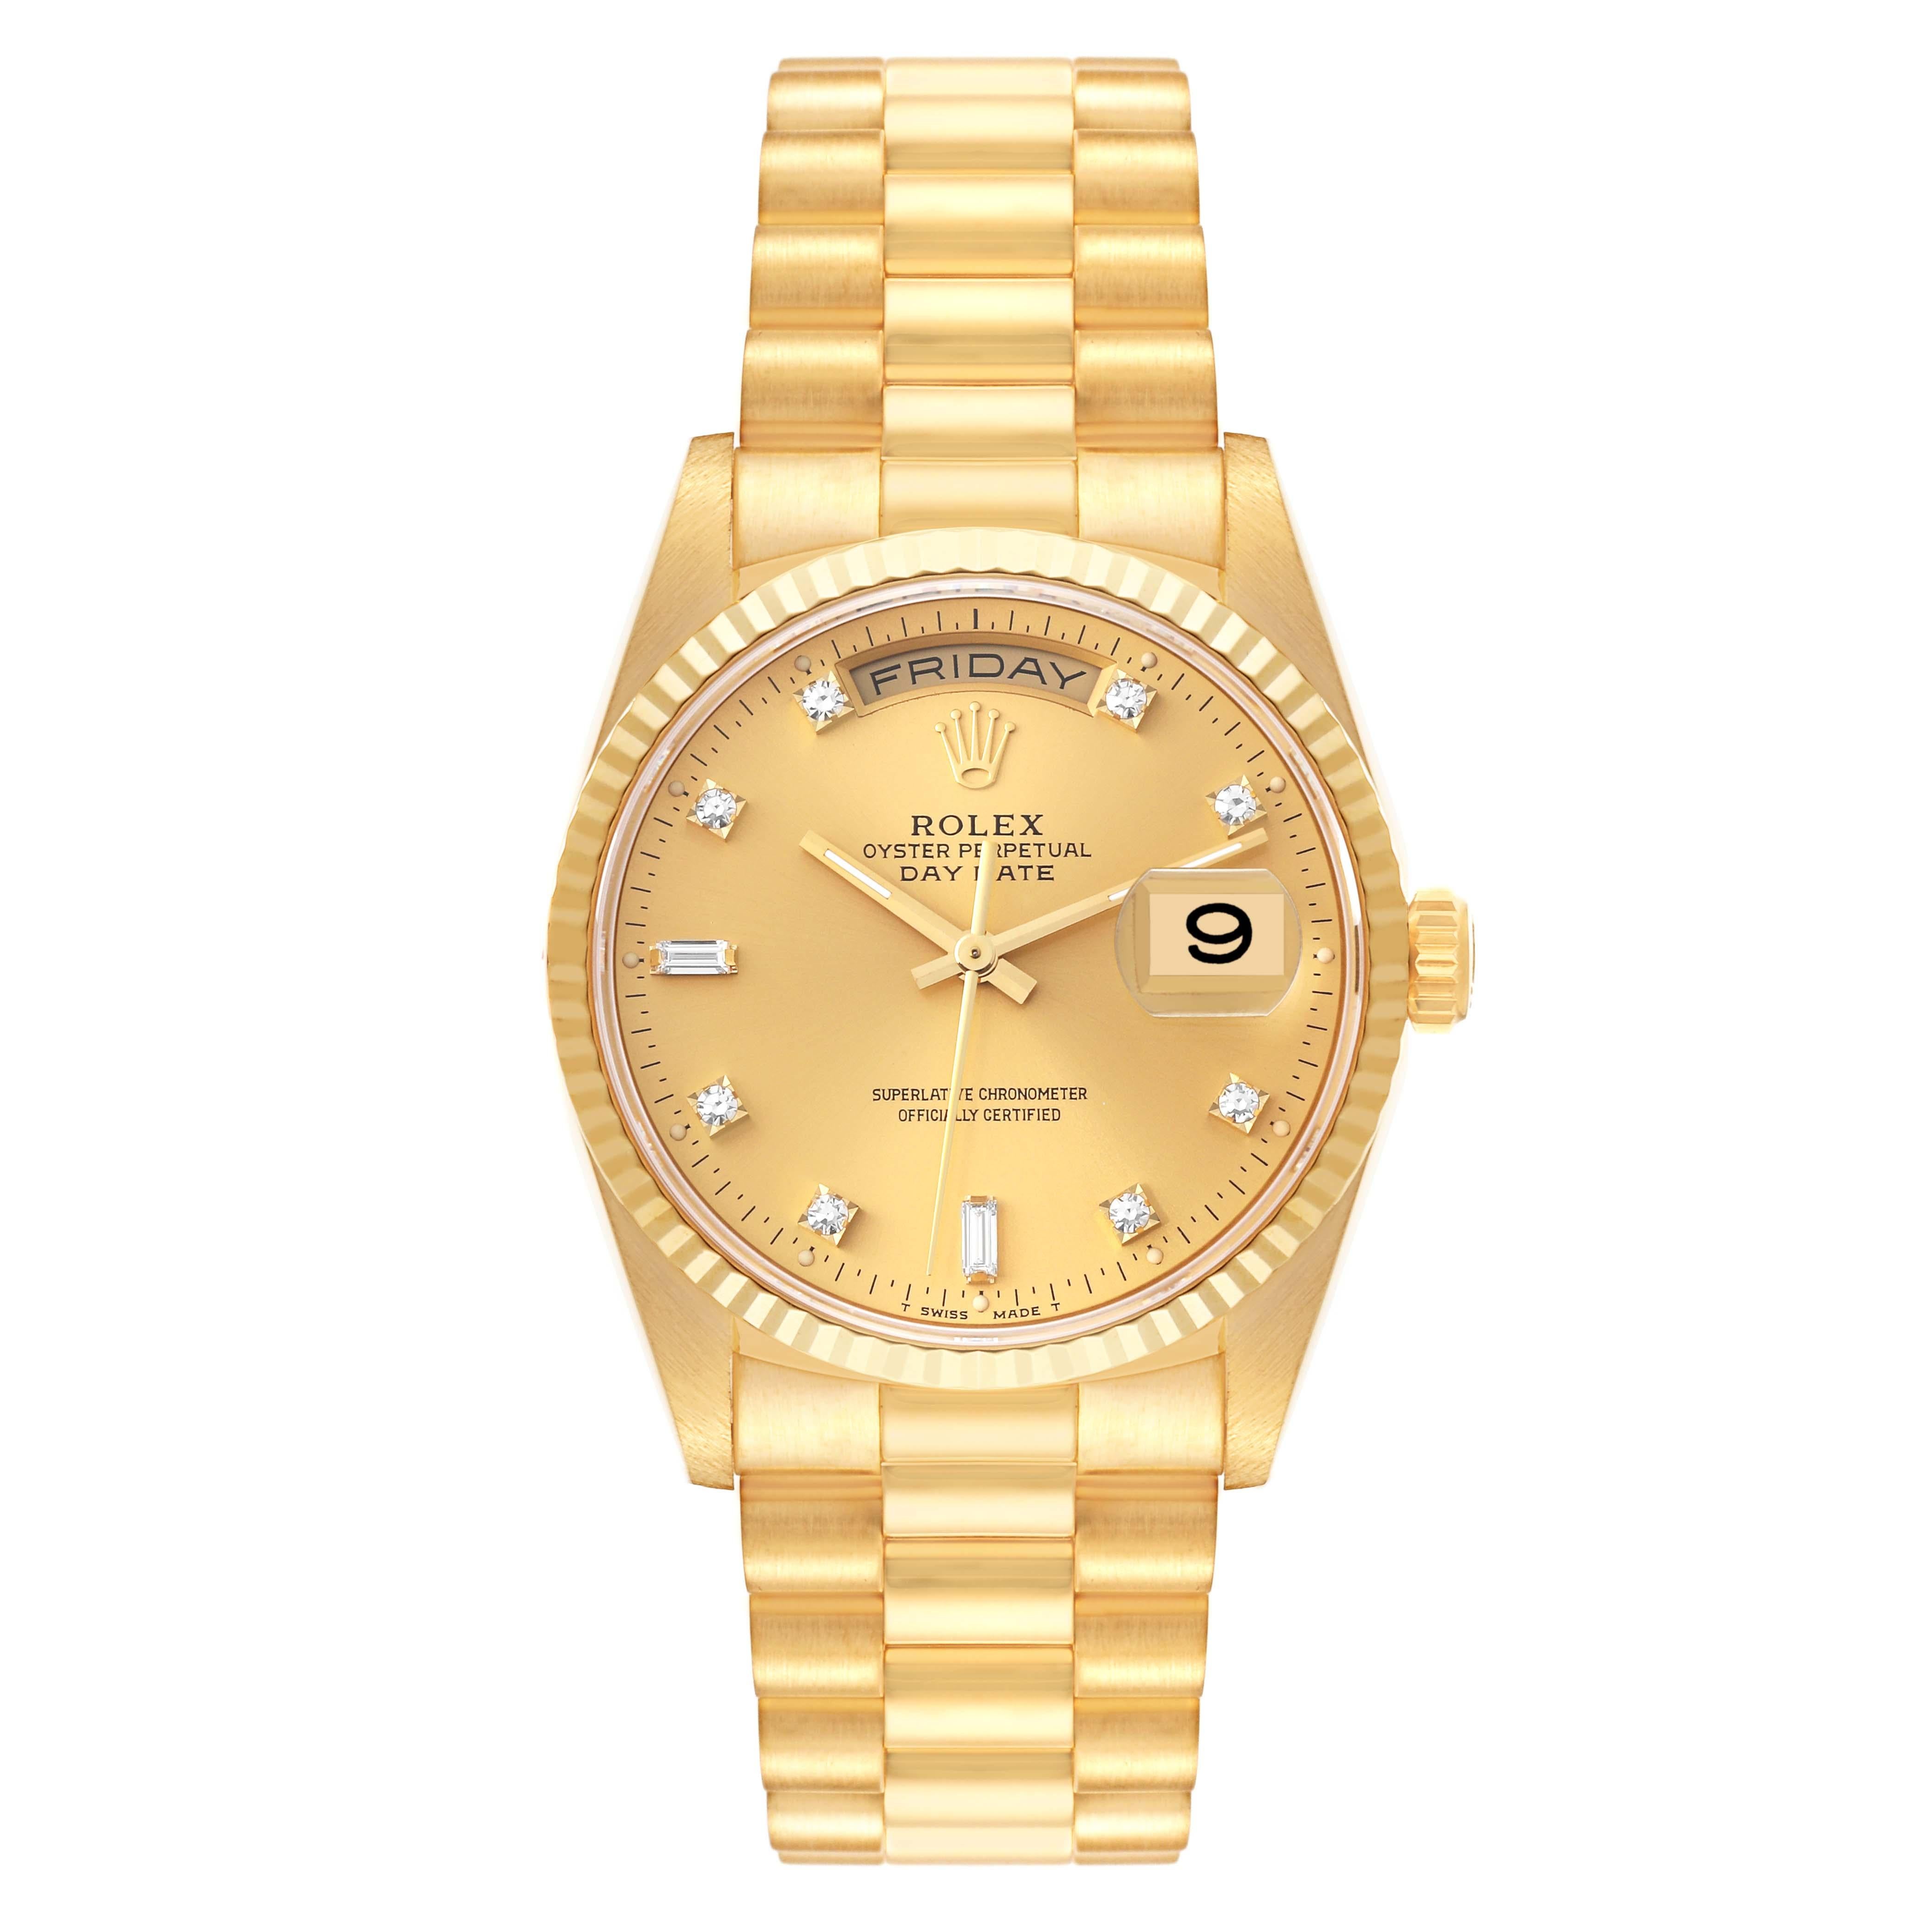 Rolex President Day-Date Yellow Gold Diamond Mens Watch 18238 Box Papers. Officially certified chronometer automatic self-winding movement. 18k yellow gold oyster case 36.0 mm in diameter. Rolex logo on the crown. 18K yellow gold fluted bezel.